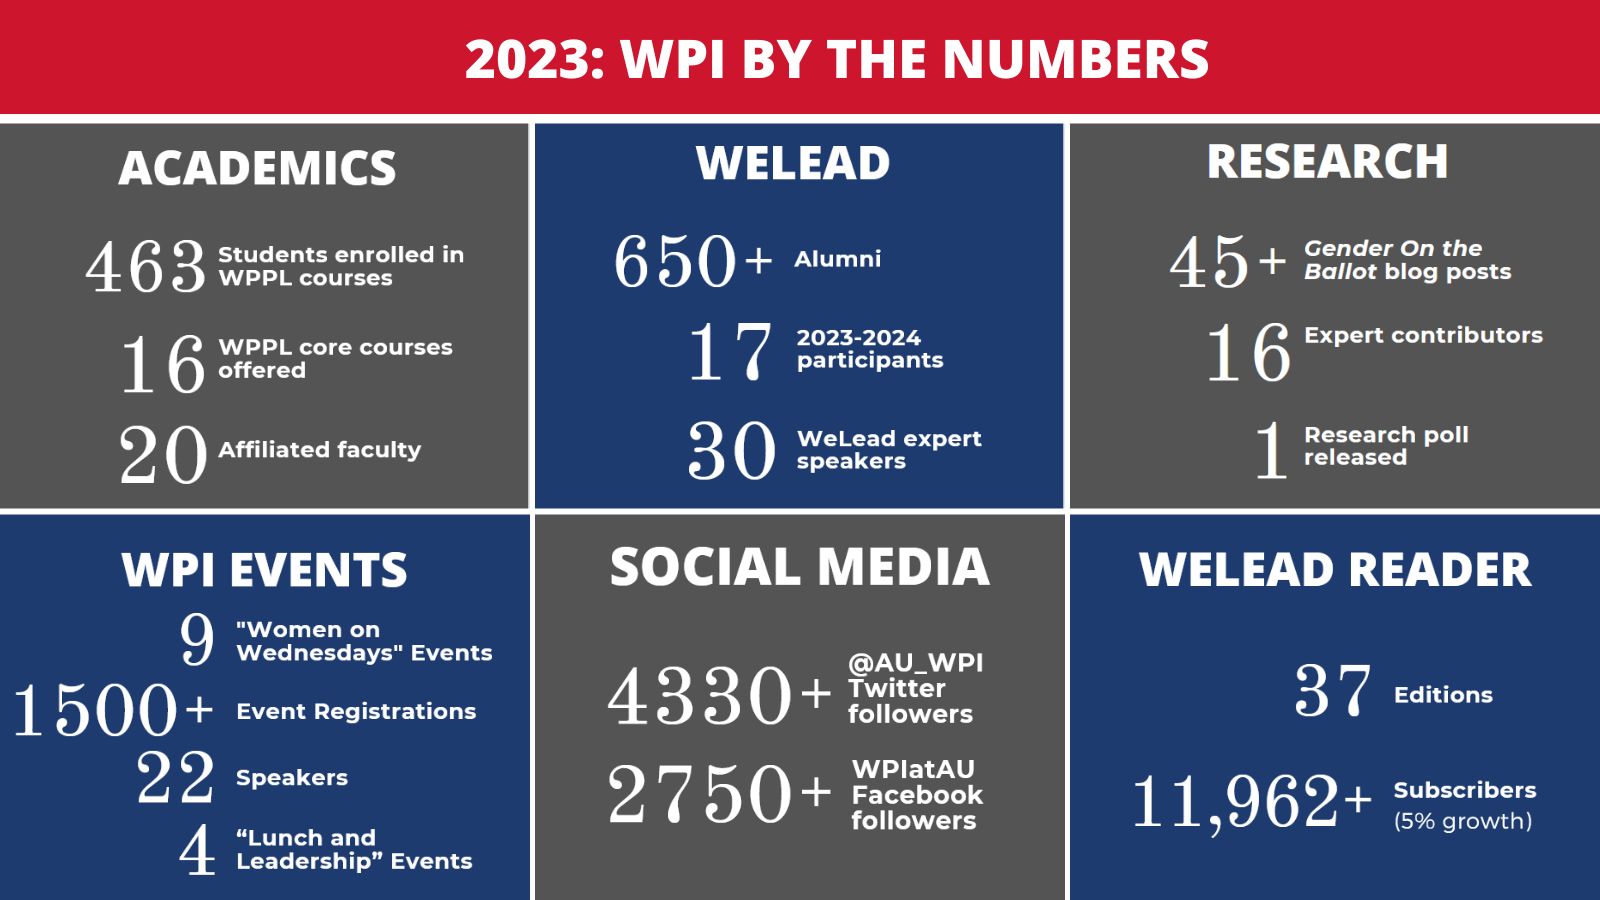 WPI By the numbers 2023